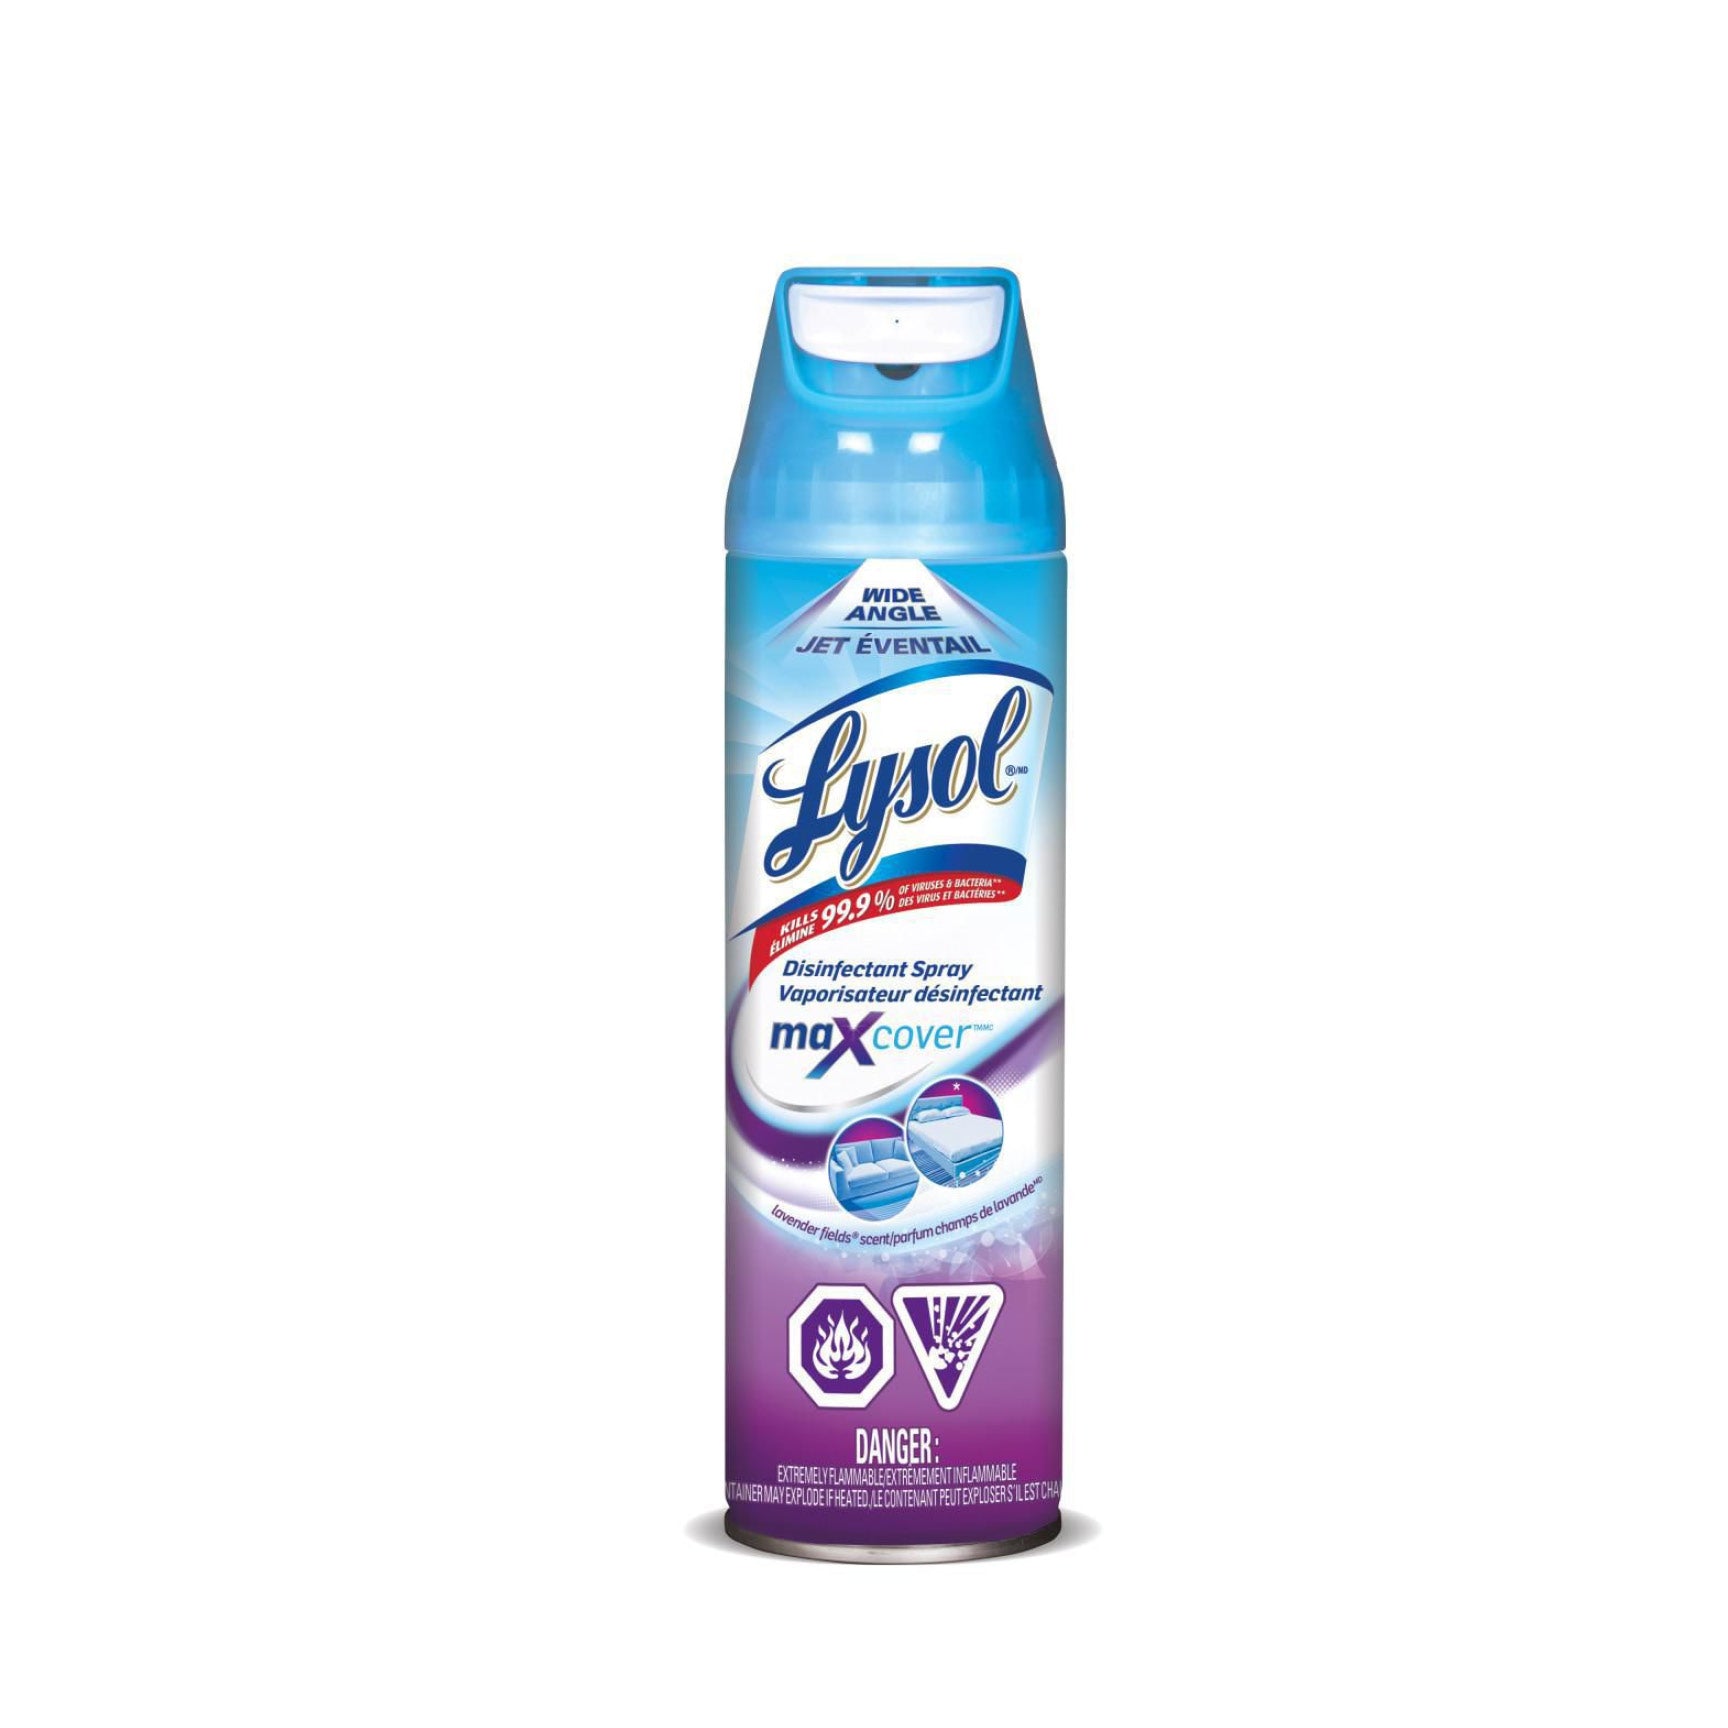 Lysol Max Cover Disinfectant Mist, Lavender Fields, 2X Wider Coverage, 425g